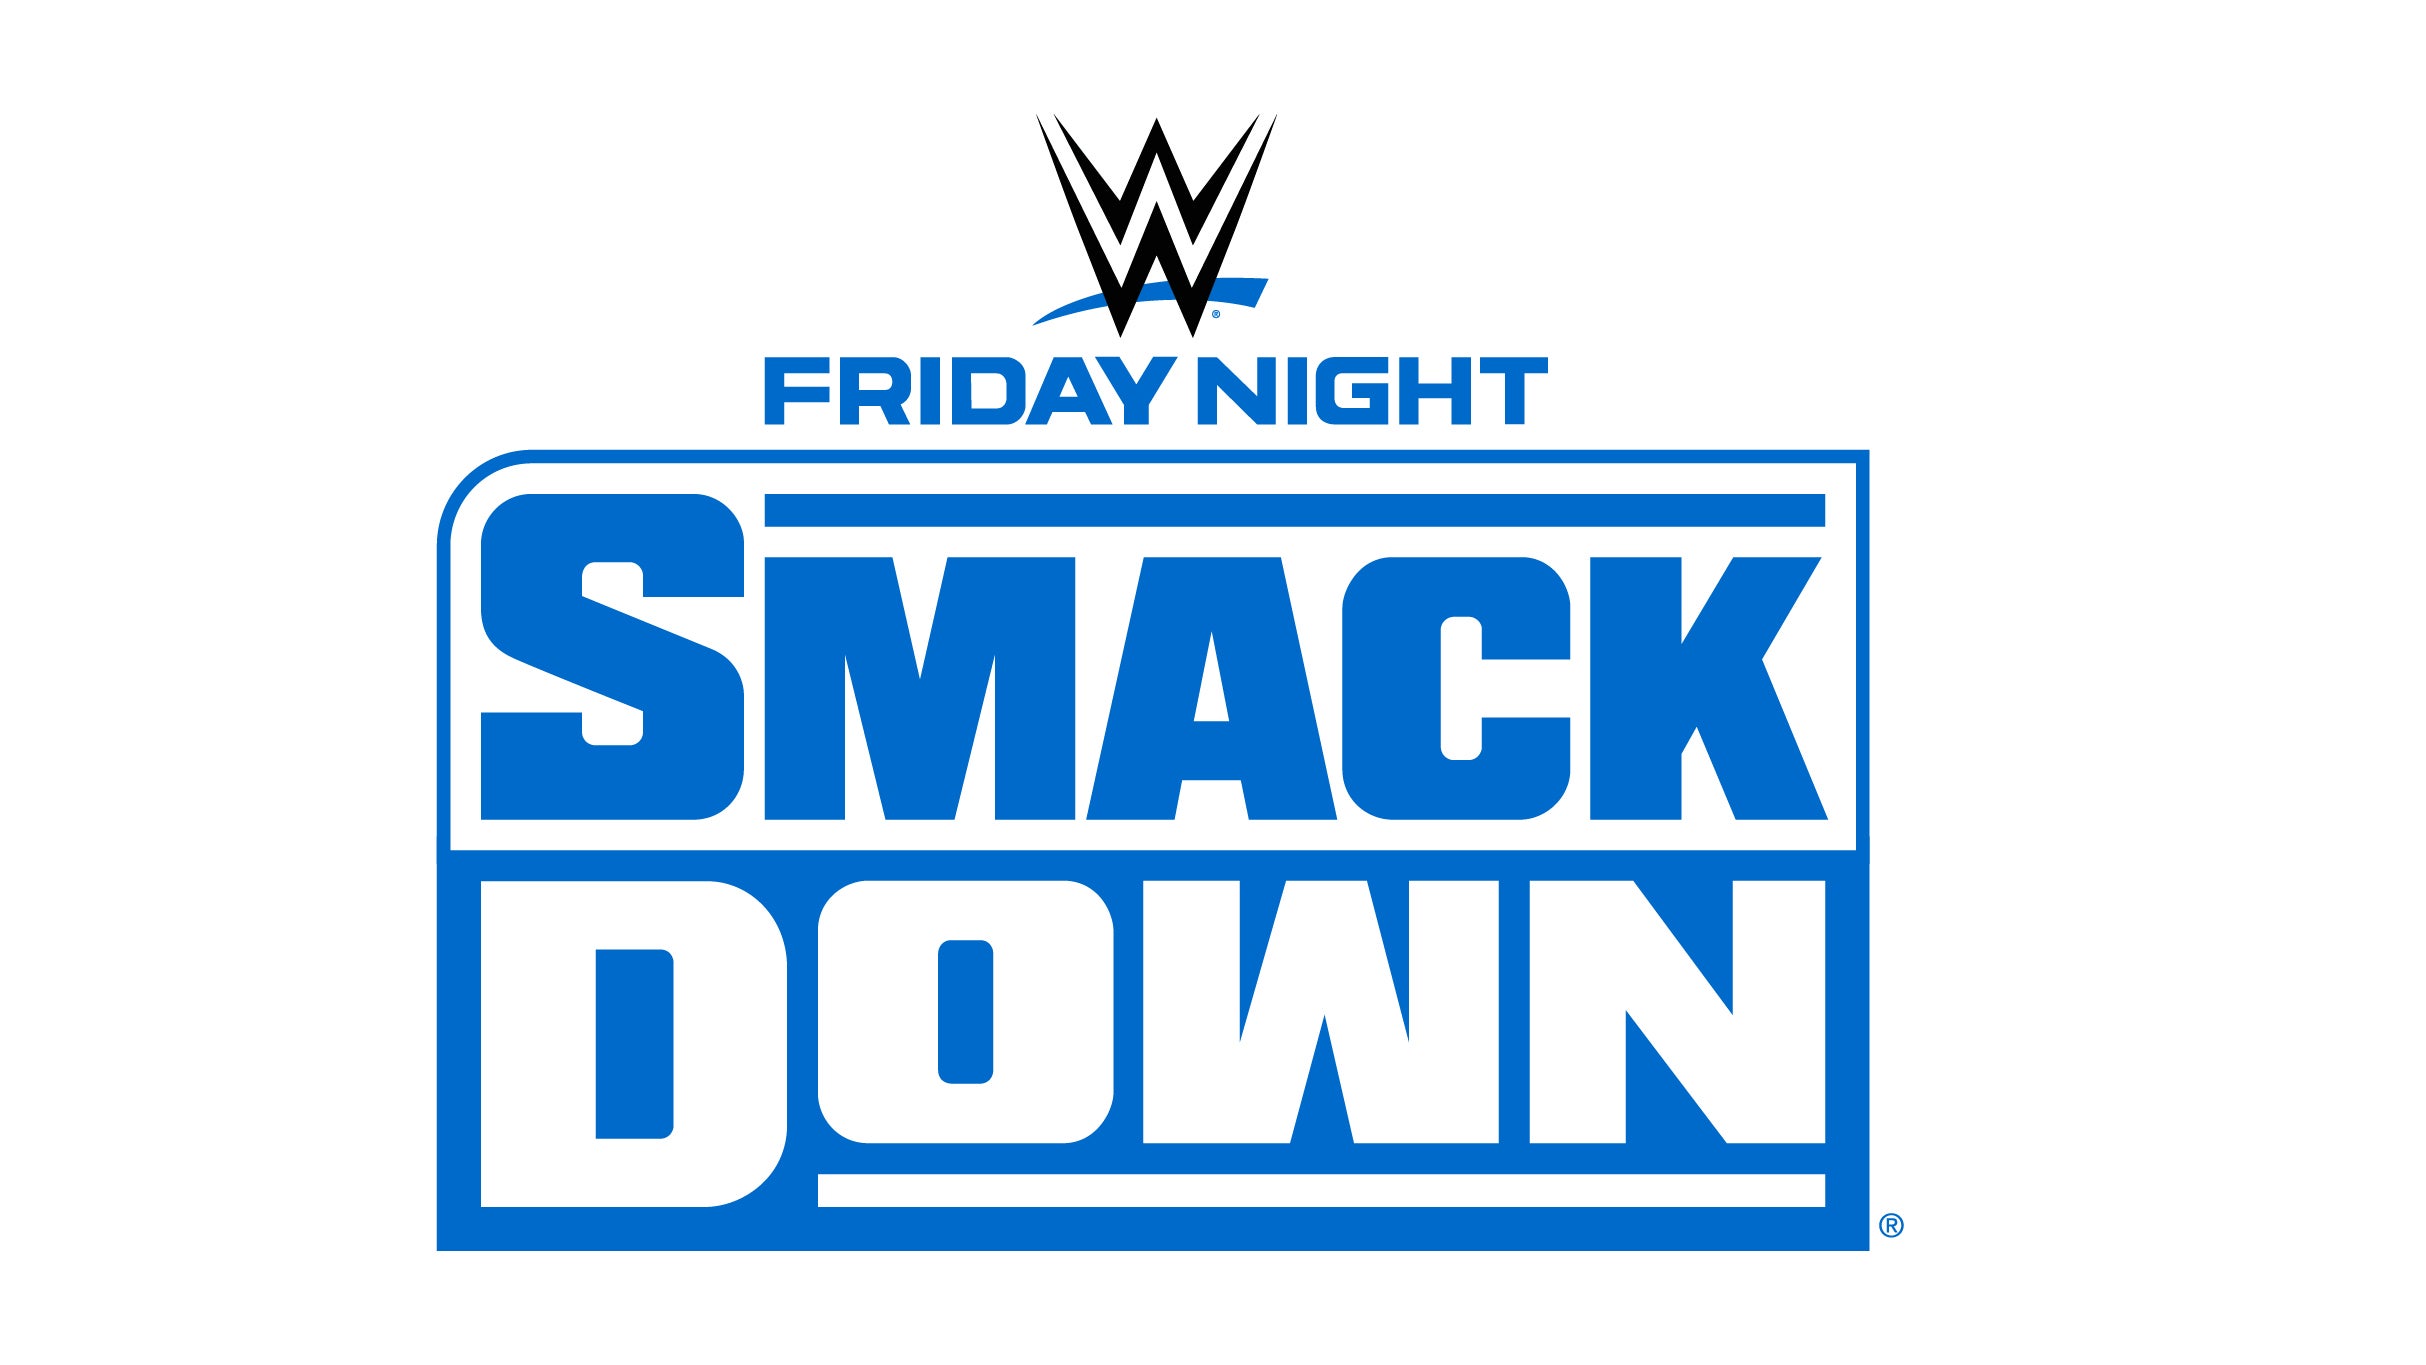 exclusive presale code to WWE Friday Night SmackDown tickets in Jacksonville